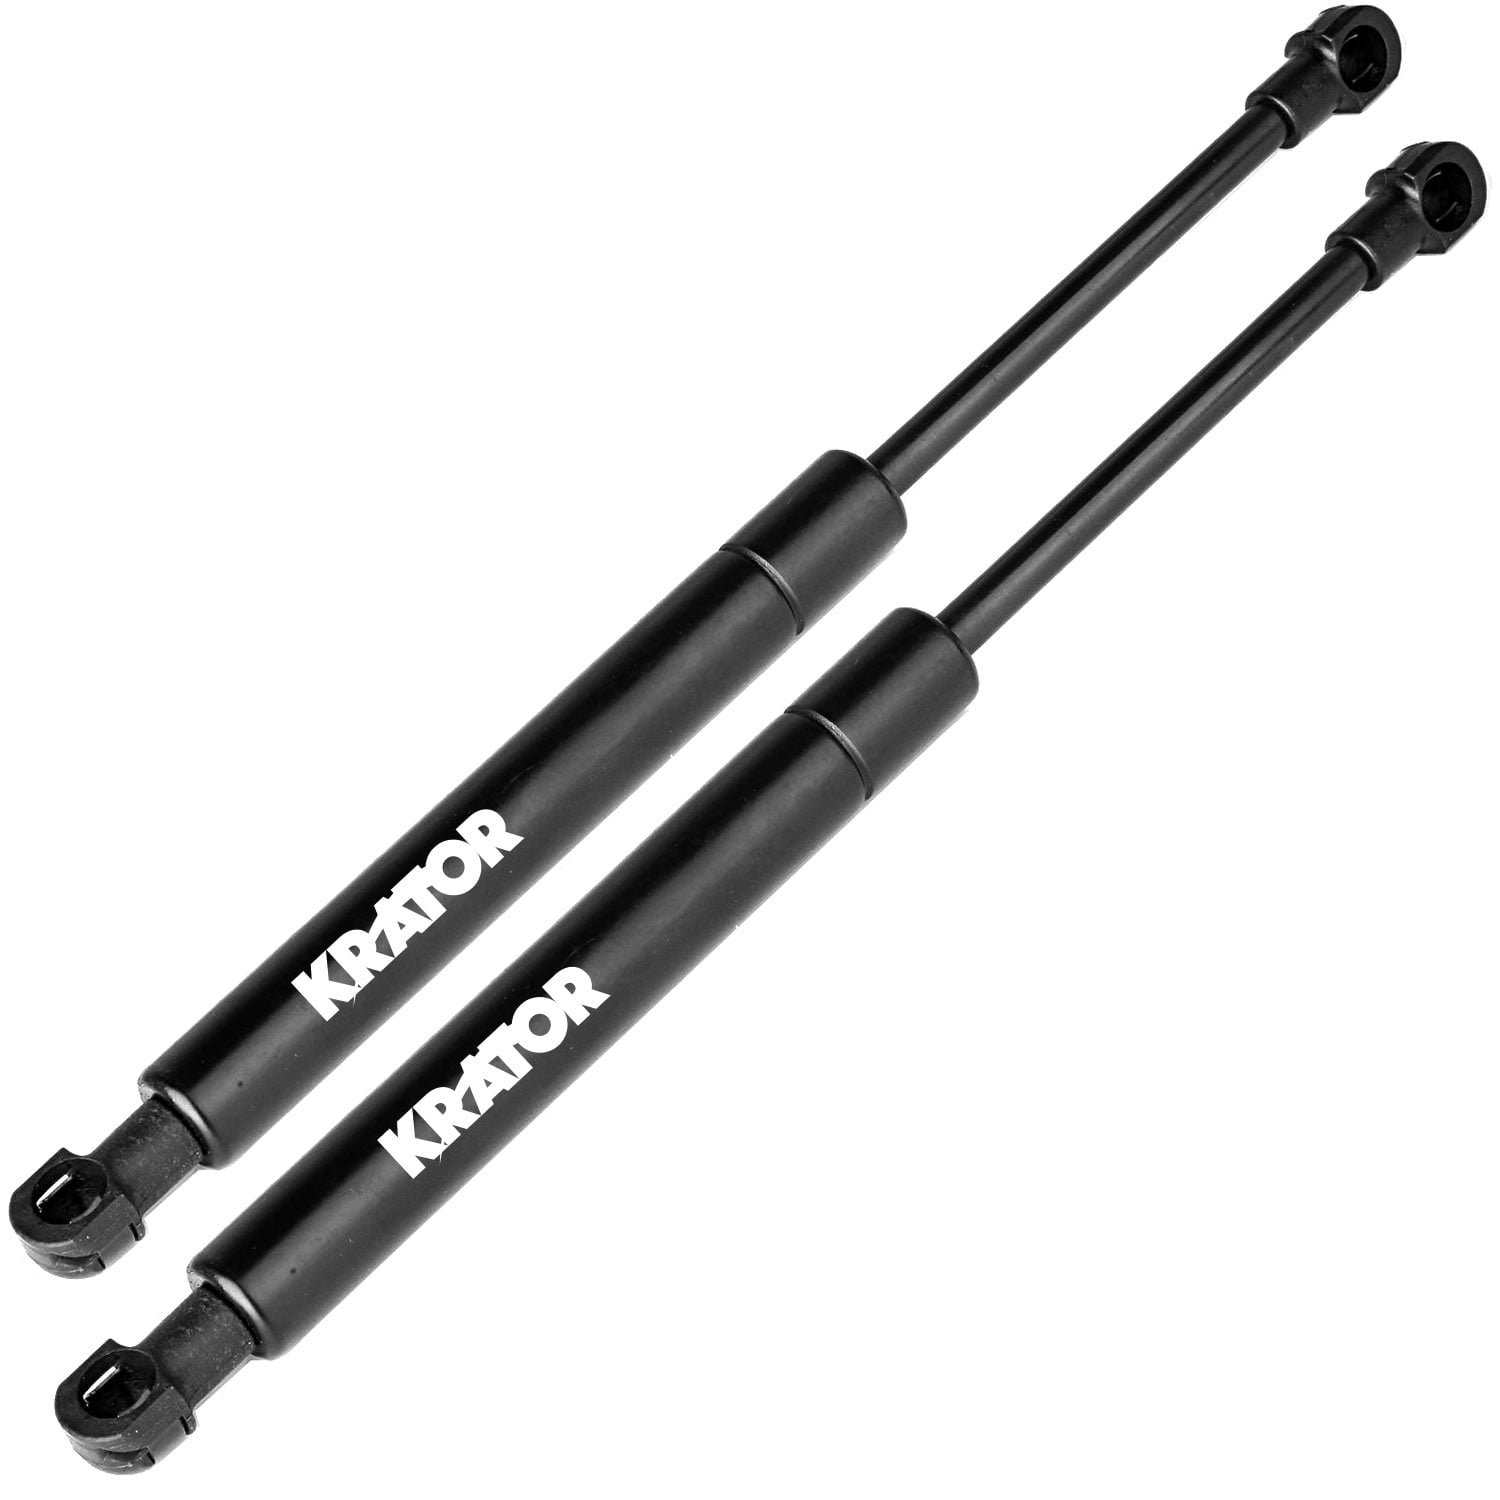 Note: 19.84 IN 2Pcs Rear Back WINDOW GLASS Struts Lift Supports Shock Gas Spring Prop Rod Compatible With 07-14 ESCALADE ESV EXT/TAHOE/Suburban/YUKON/YUKON XL 1500 2500 